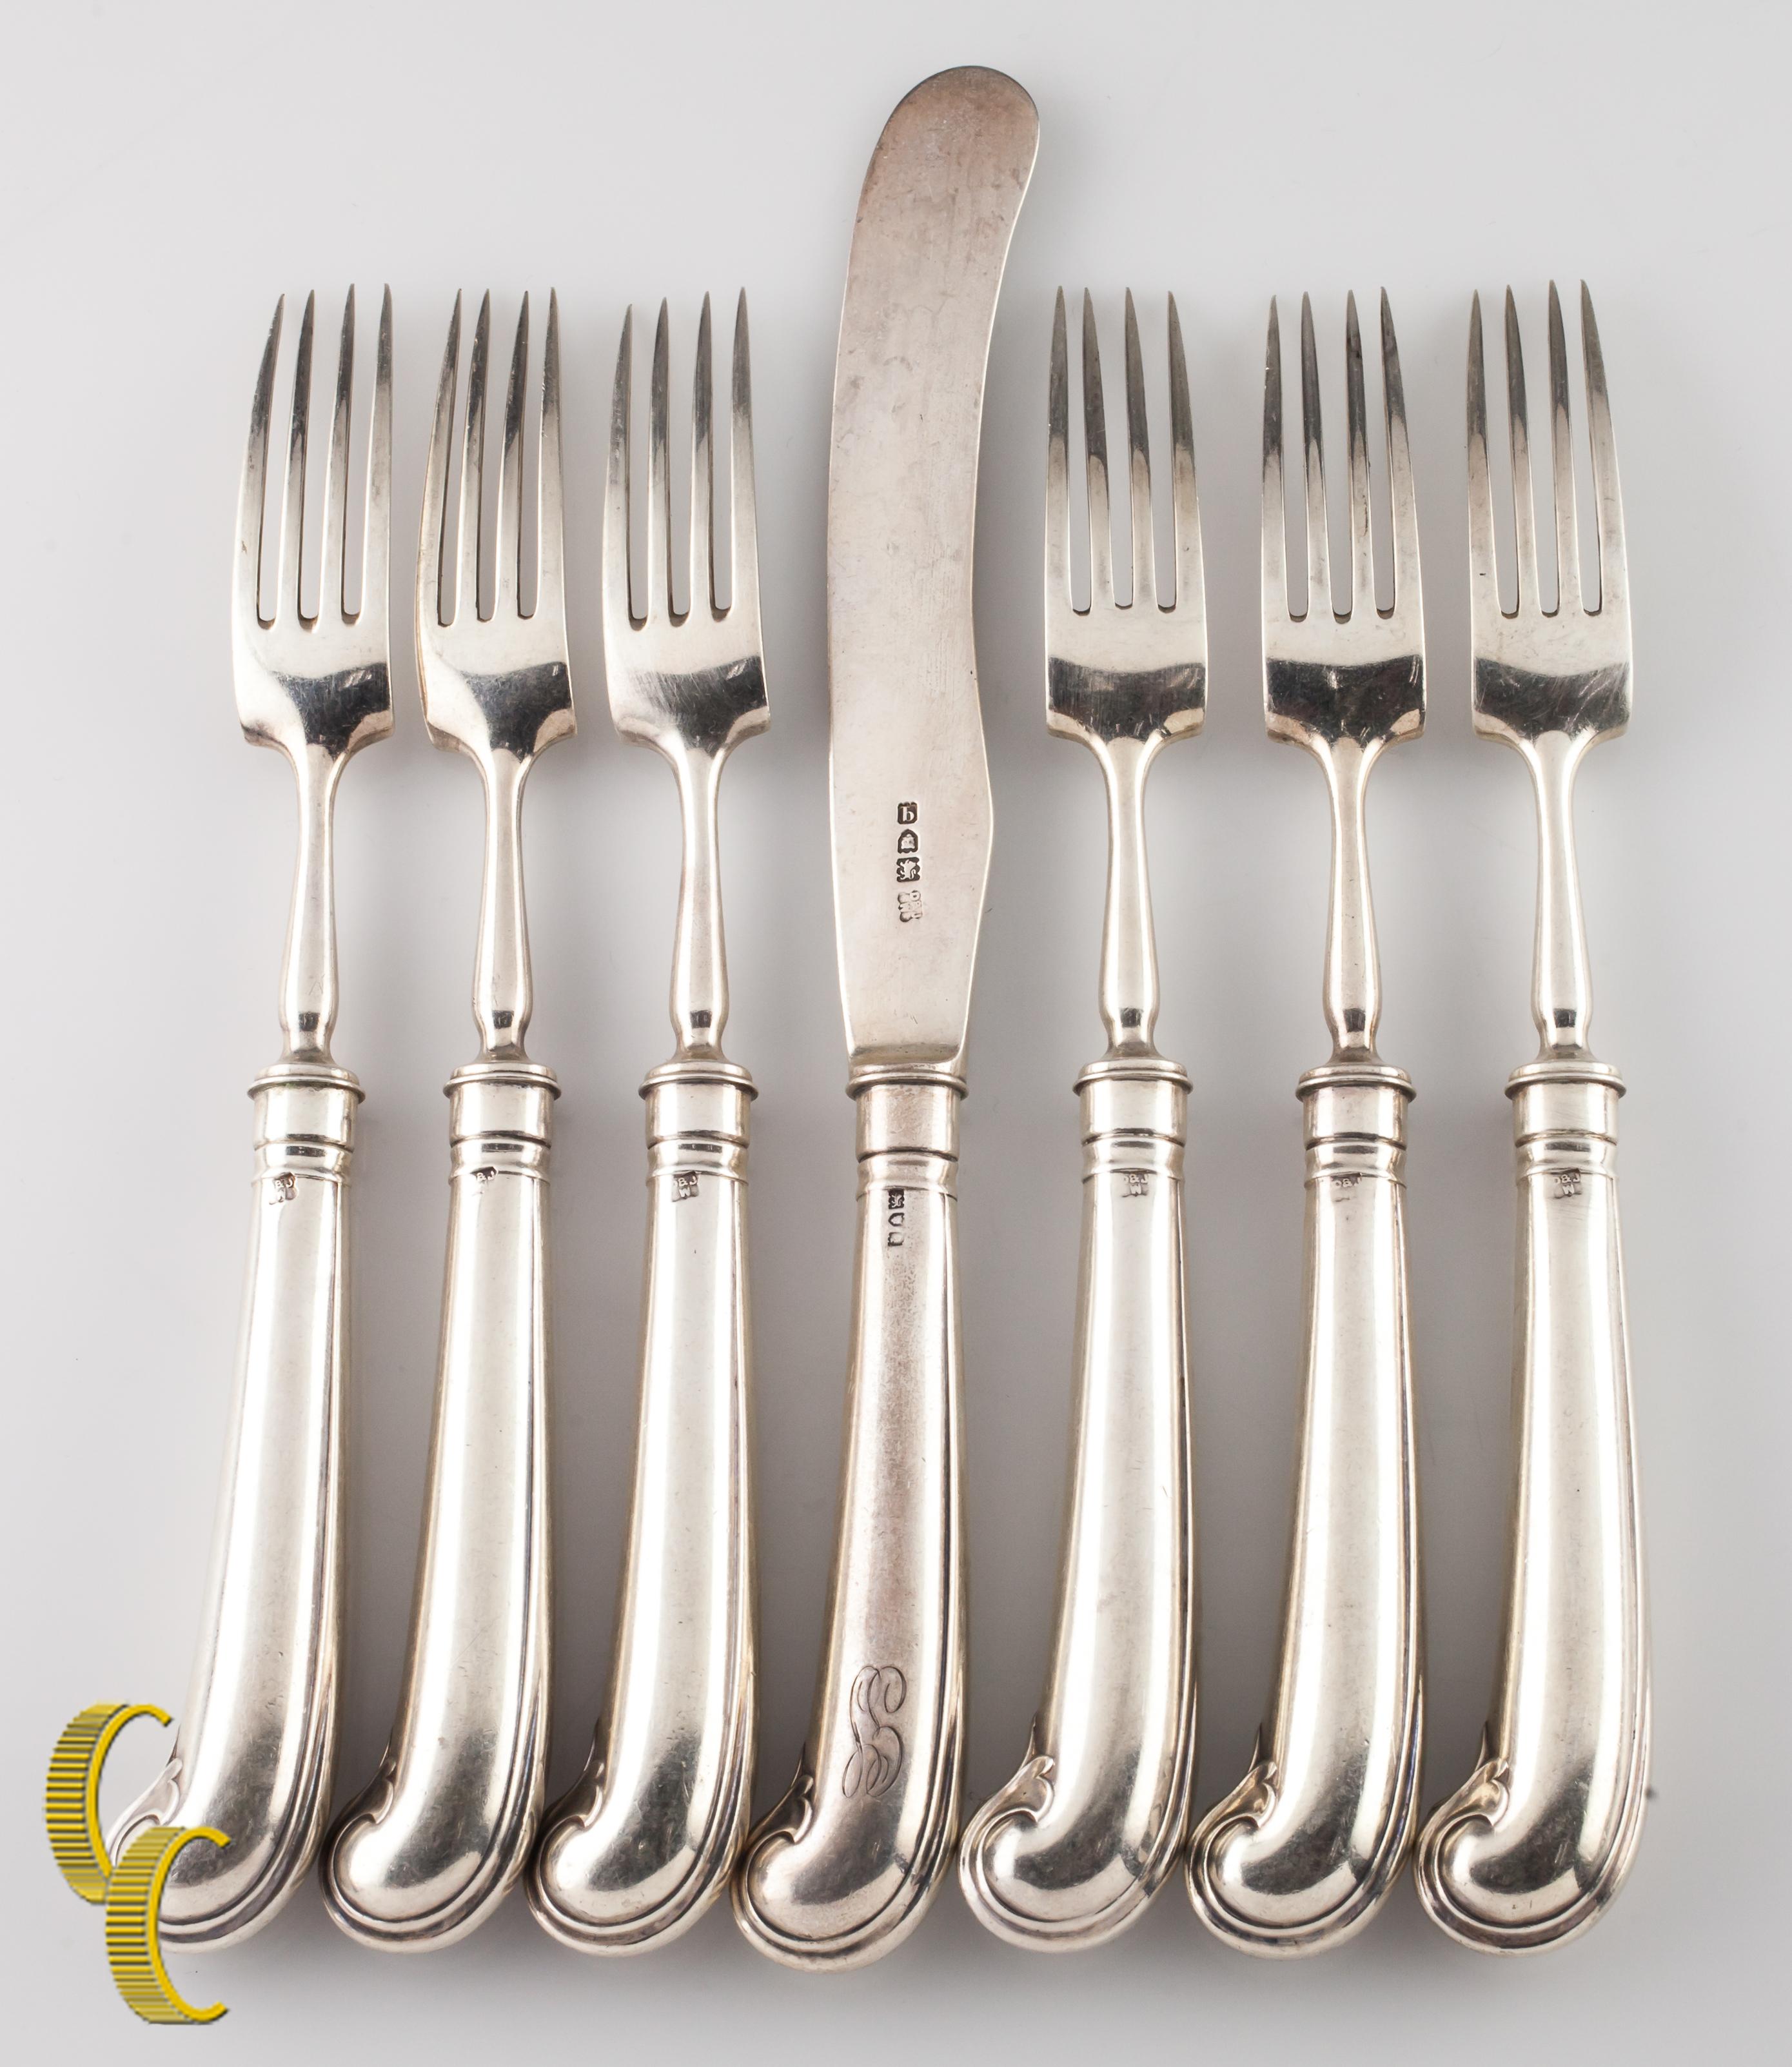 
D&J Welby Sterling Silver Flatware Set 6 Forks and 1 Butter Knife London 1911

Six Forks and one Butter Knife by D&J Welby Co.
Sterling Silver
London Hallmark
Assay Date Mark: 1911
Pieces are in Good Vintage Condition. Some Minor scratches and